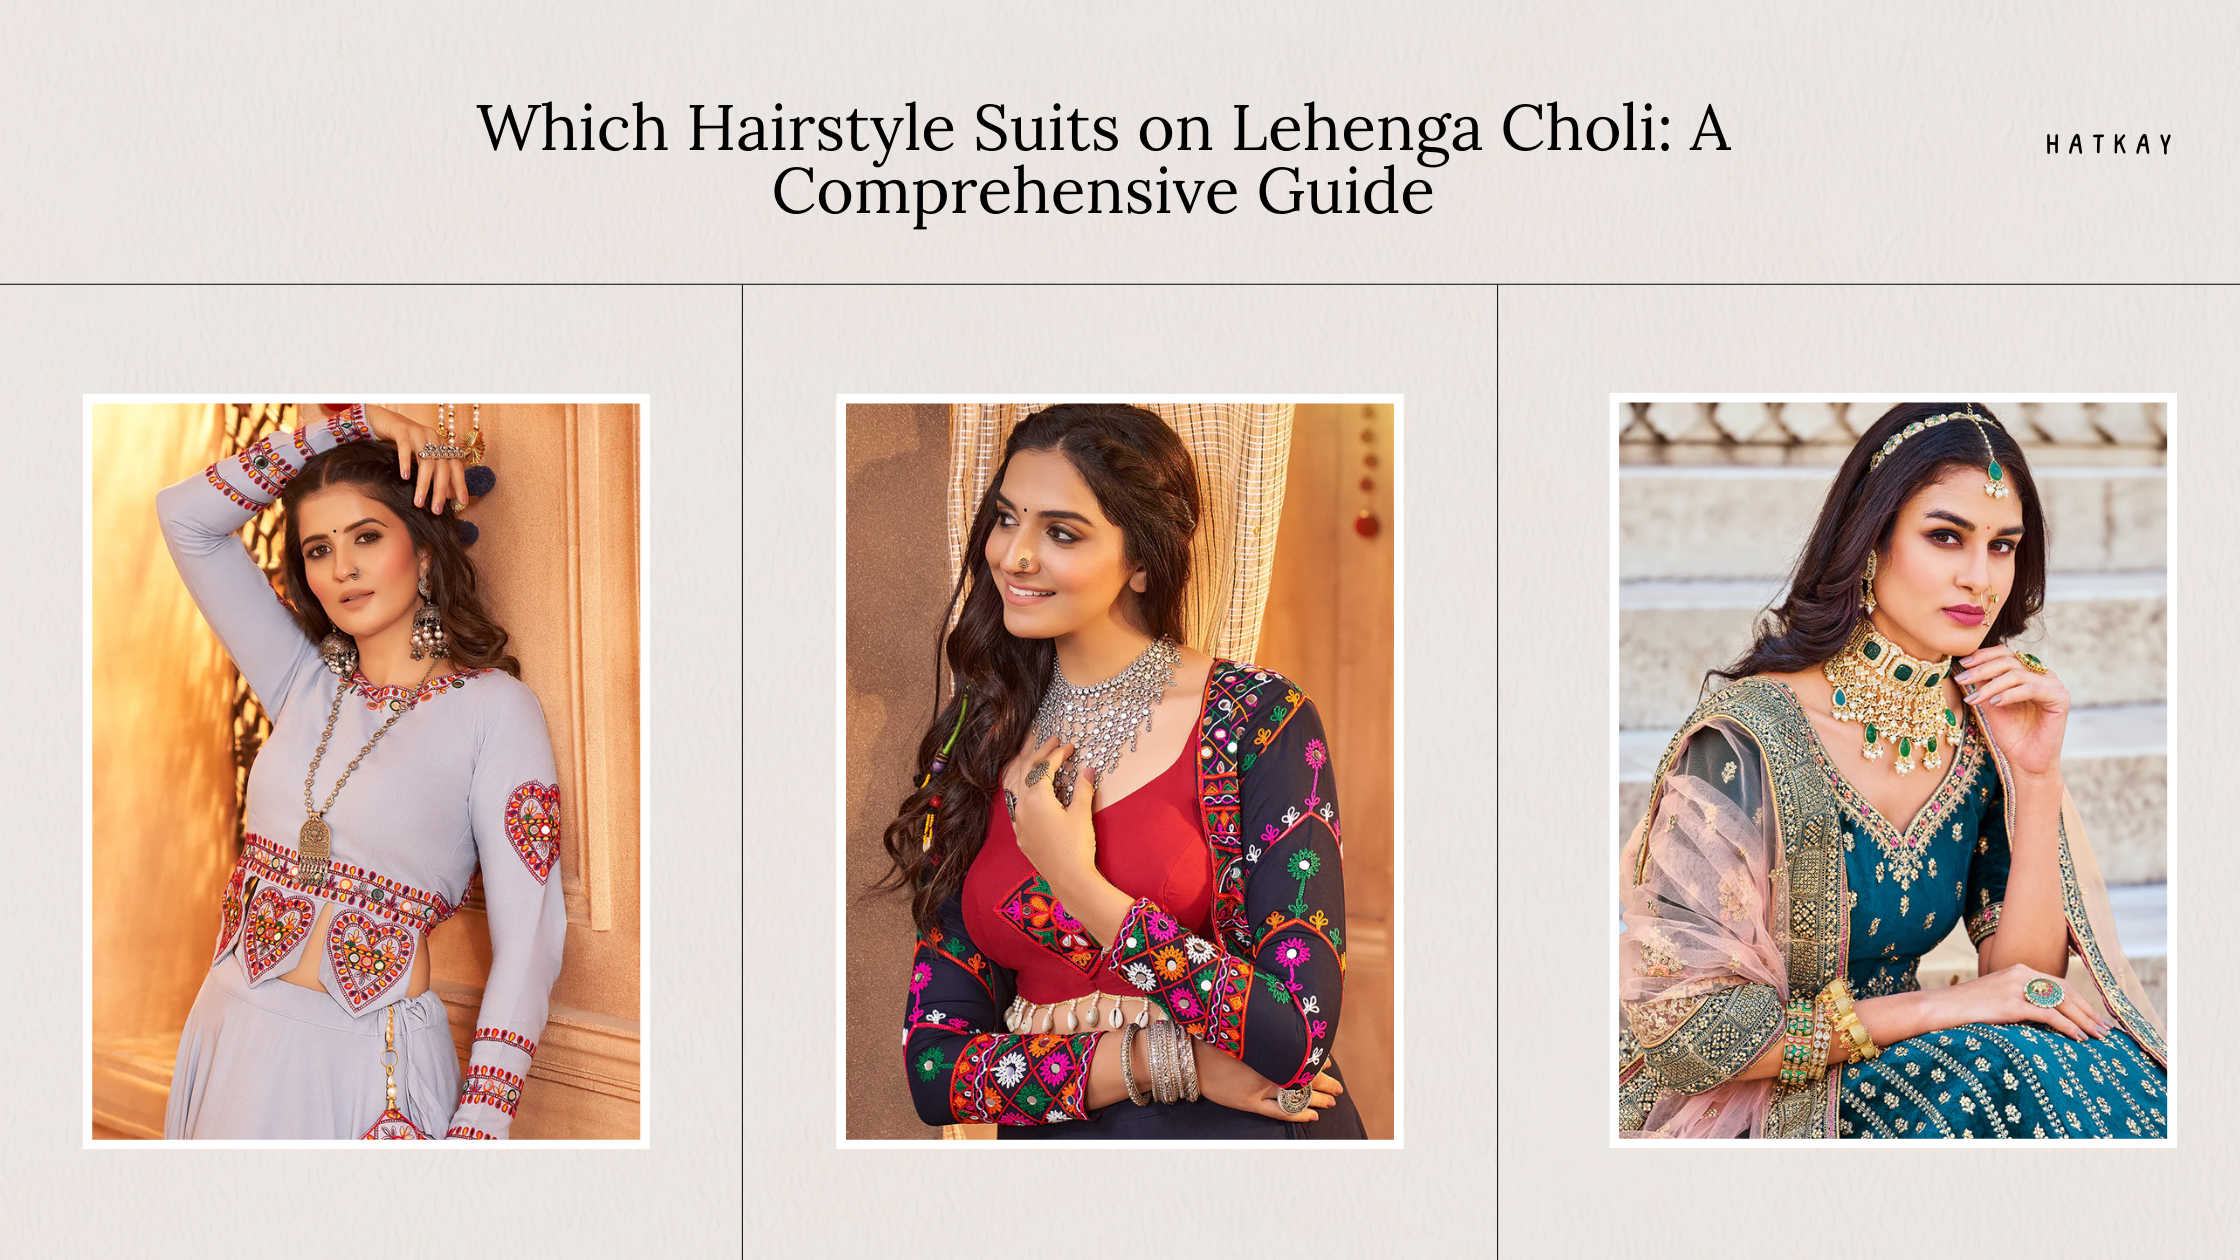 Which Hairstyle Suits on Lehenga Choli: A Comprehensive Guide